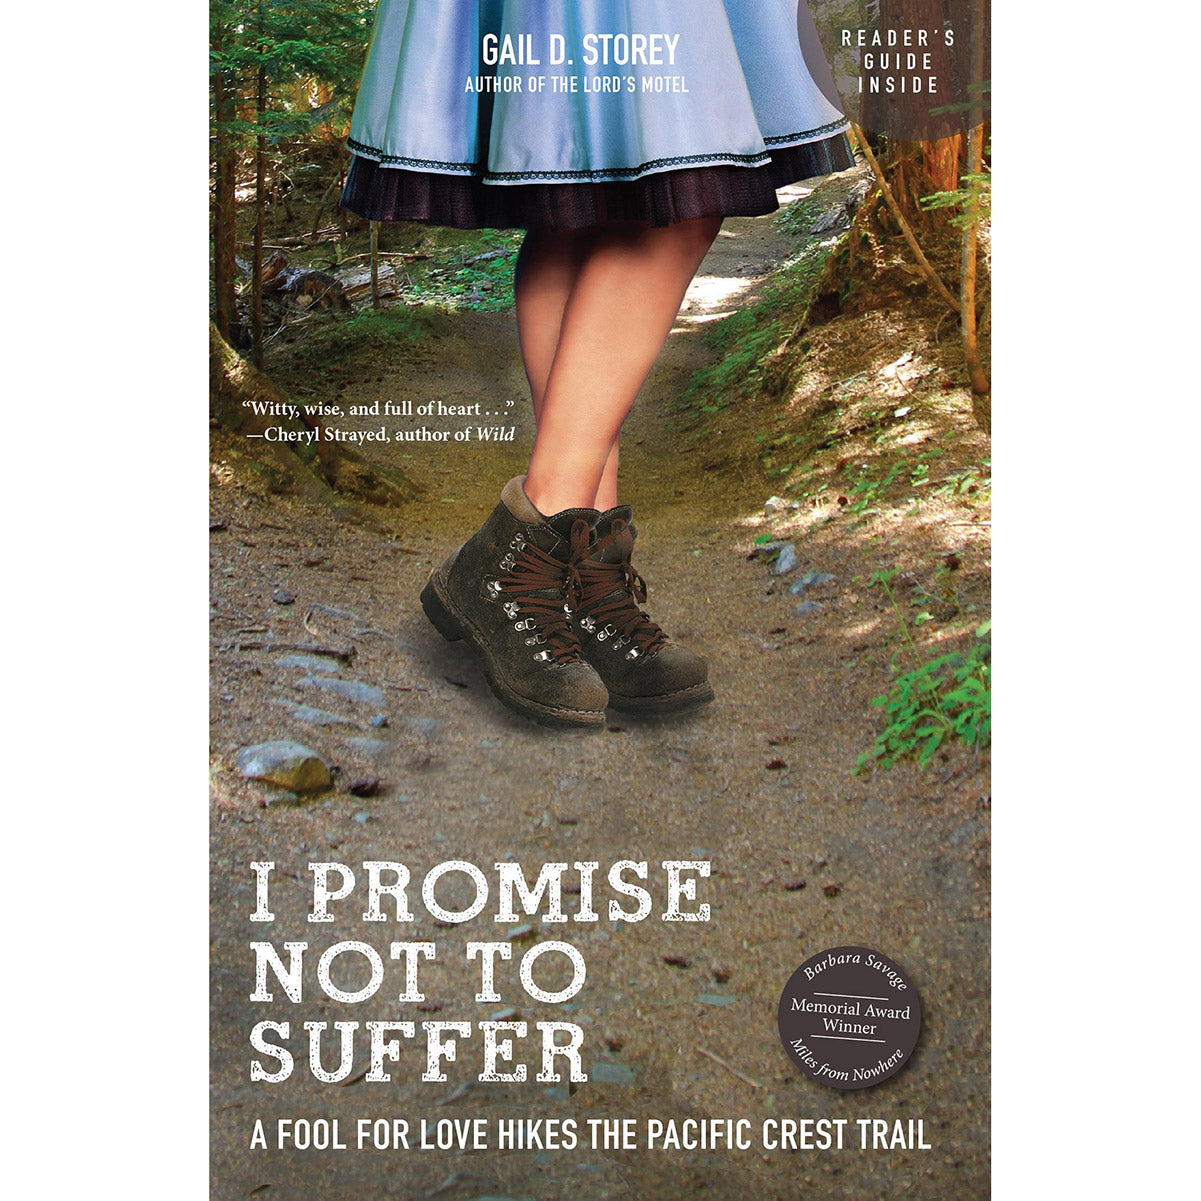 i promise not to suffer: a fool for love hikes the pacific crest trail